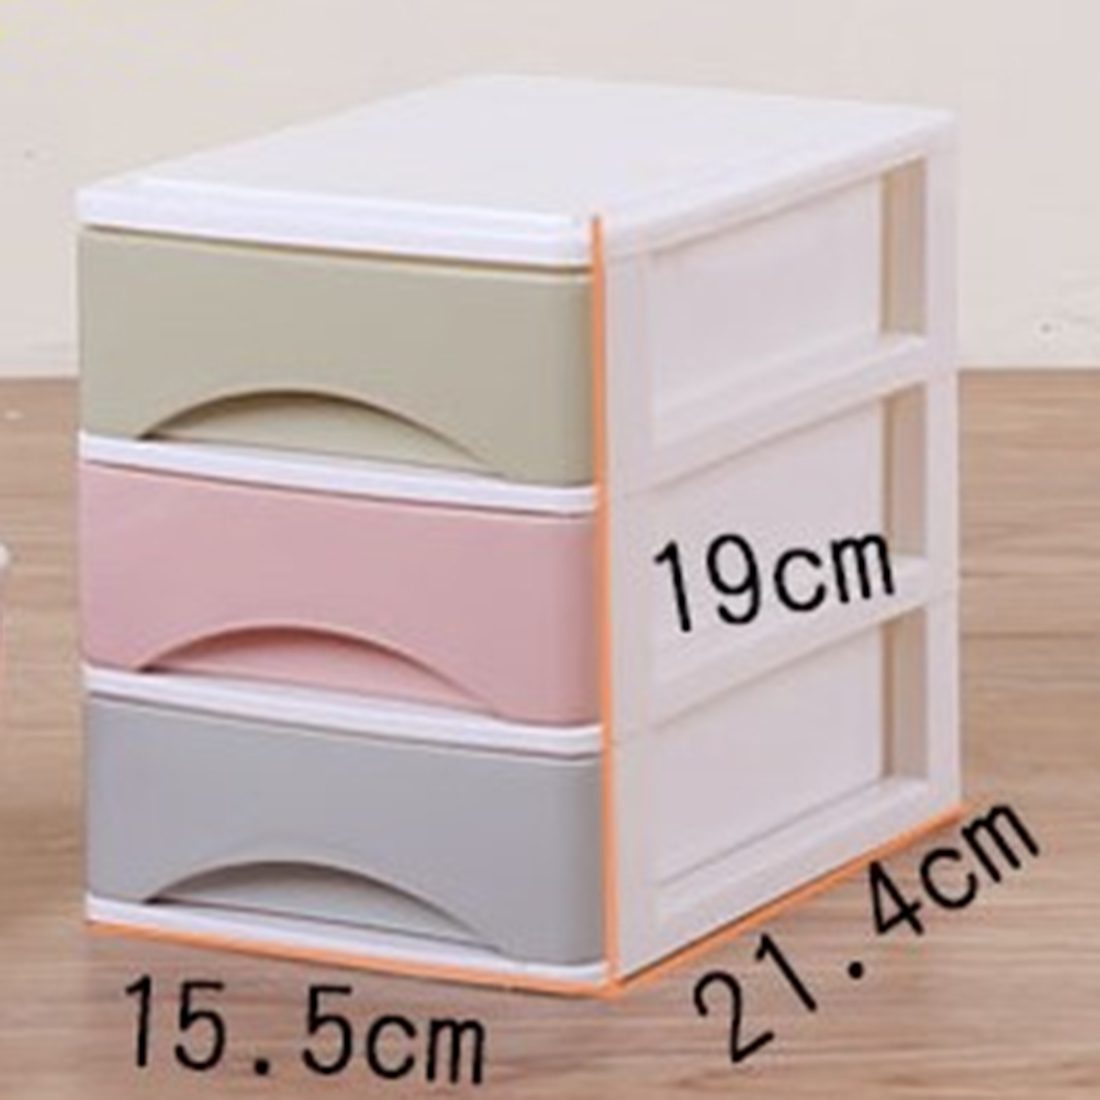 HIPSTEEN Macaron Color Drawers Four/Three Layers Draw-out Desk Storage Box Container Organizer - Color Random